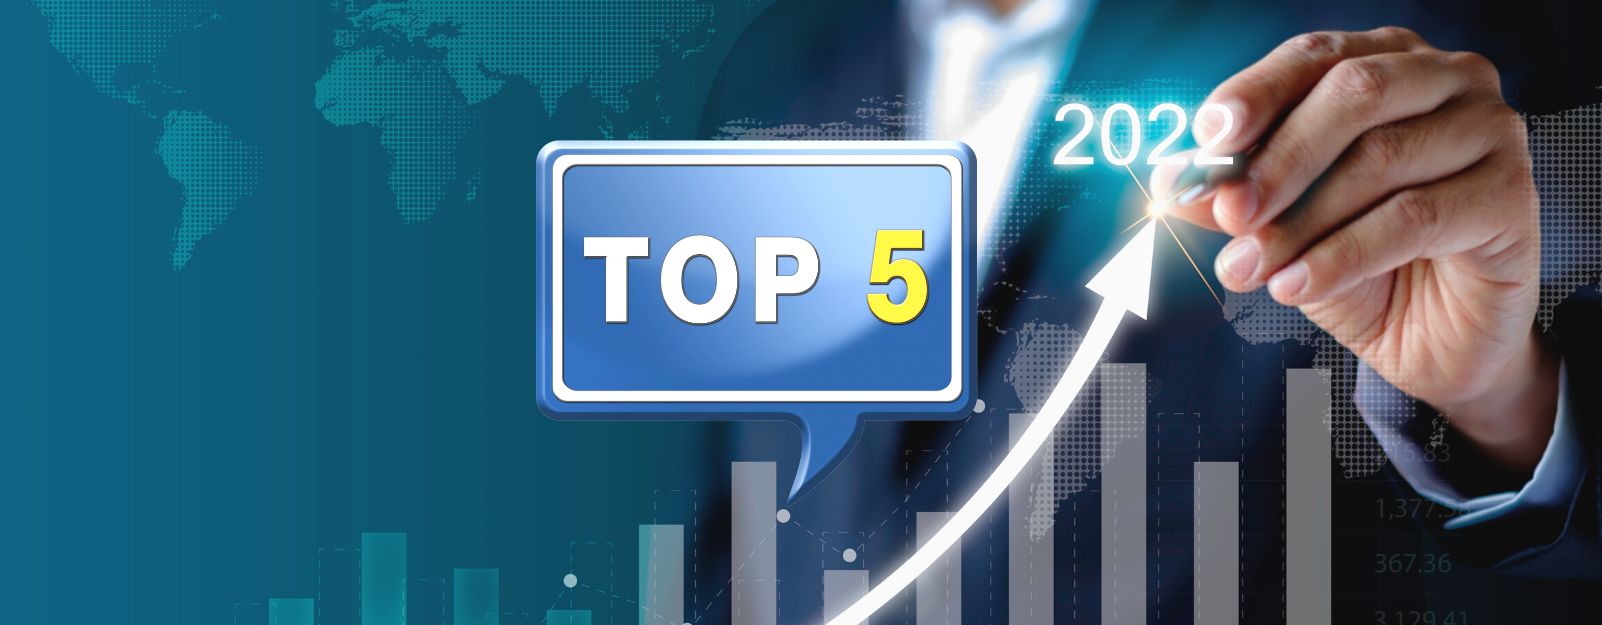 Top 5 Most Accumulated Stocks in 2022